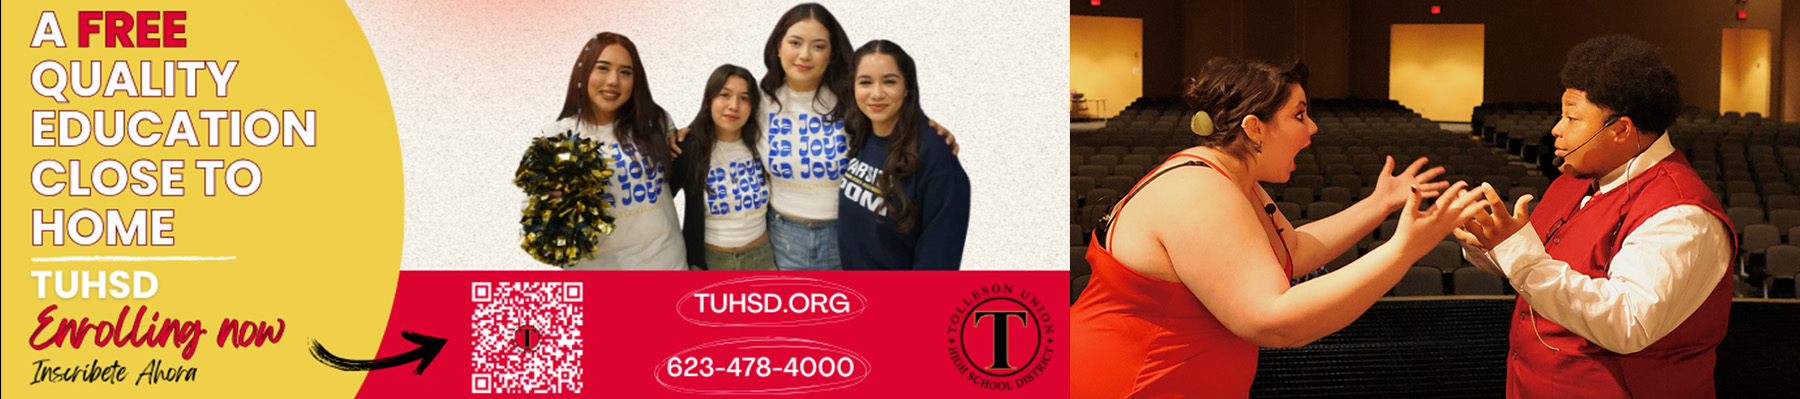 A free quality education close to home - TUHSD Enrolling now | Inscribete Ahora - tuhsd.org - 623-478-4000| National School social workers